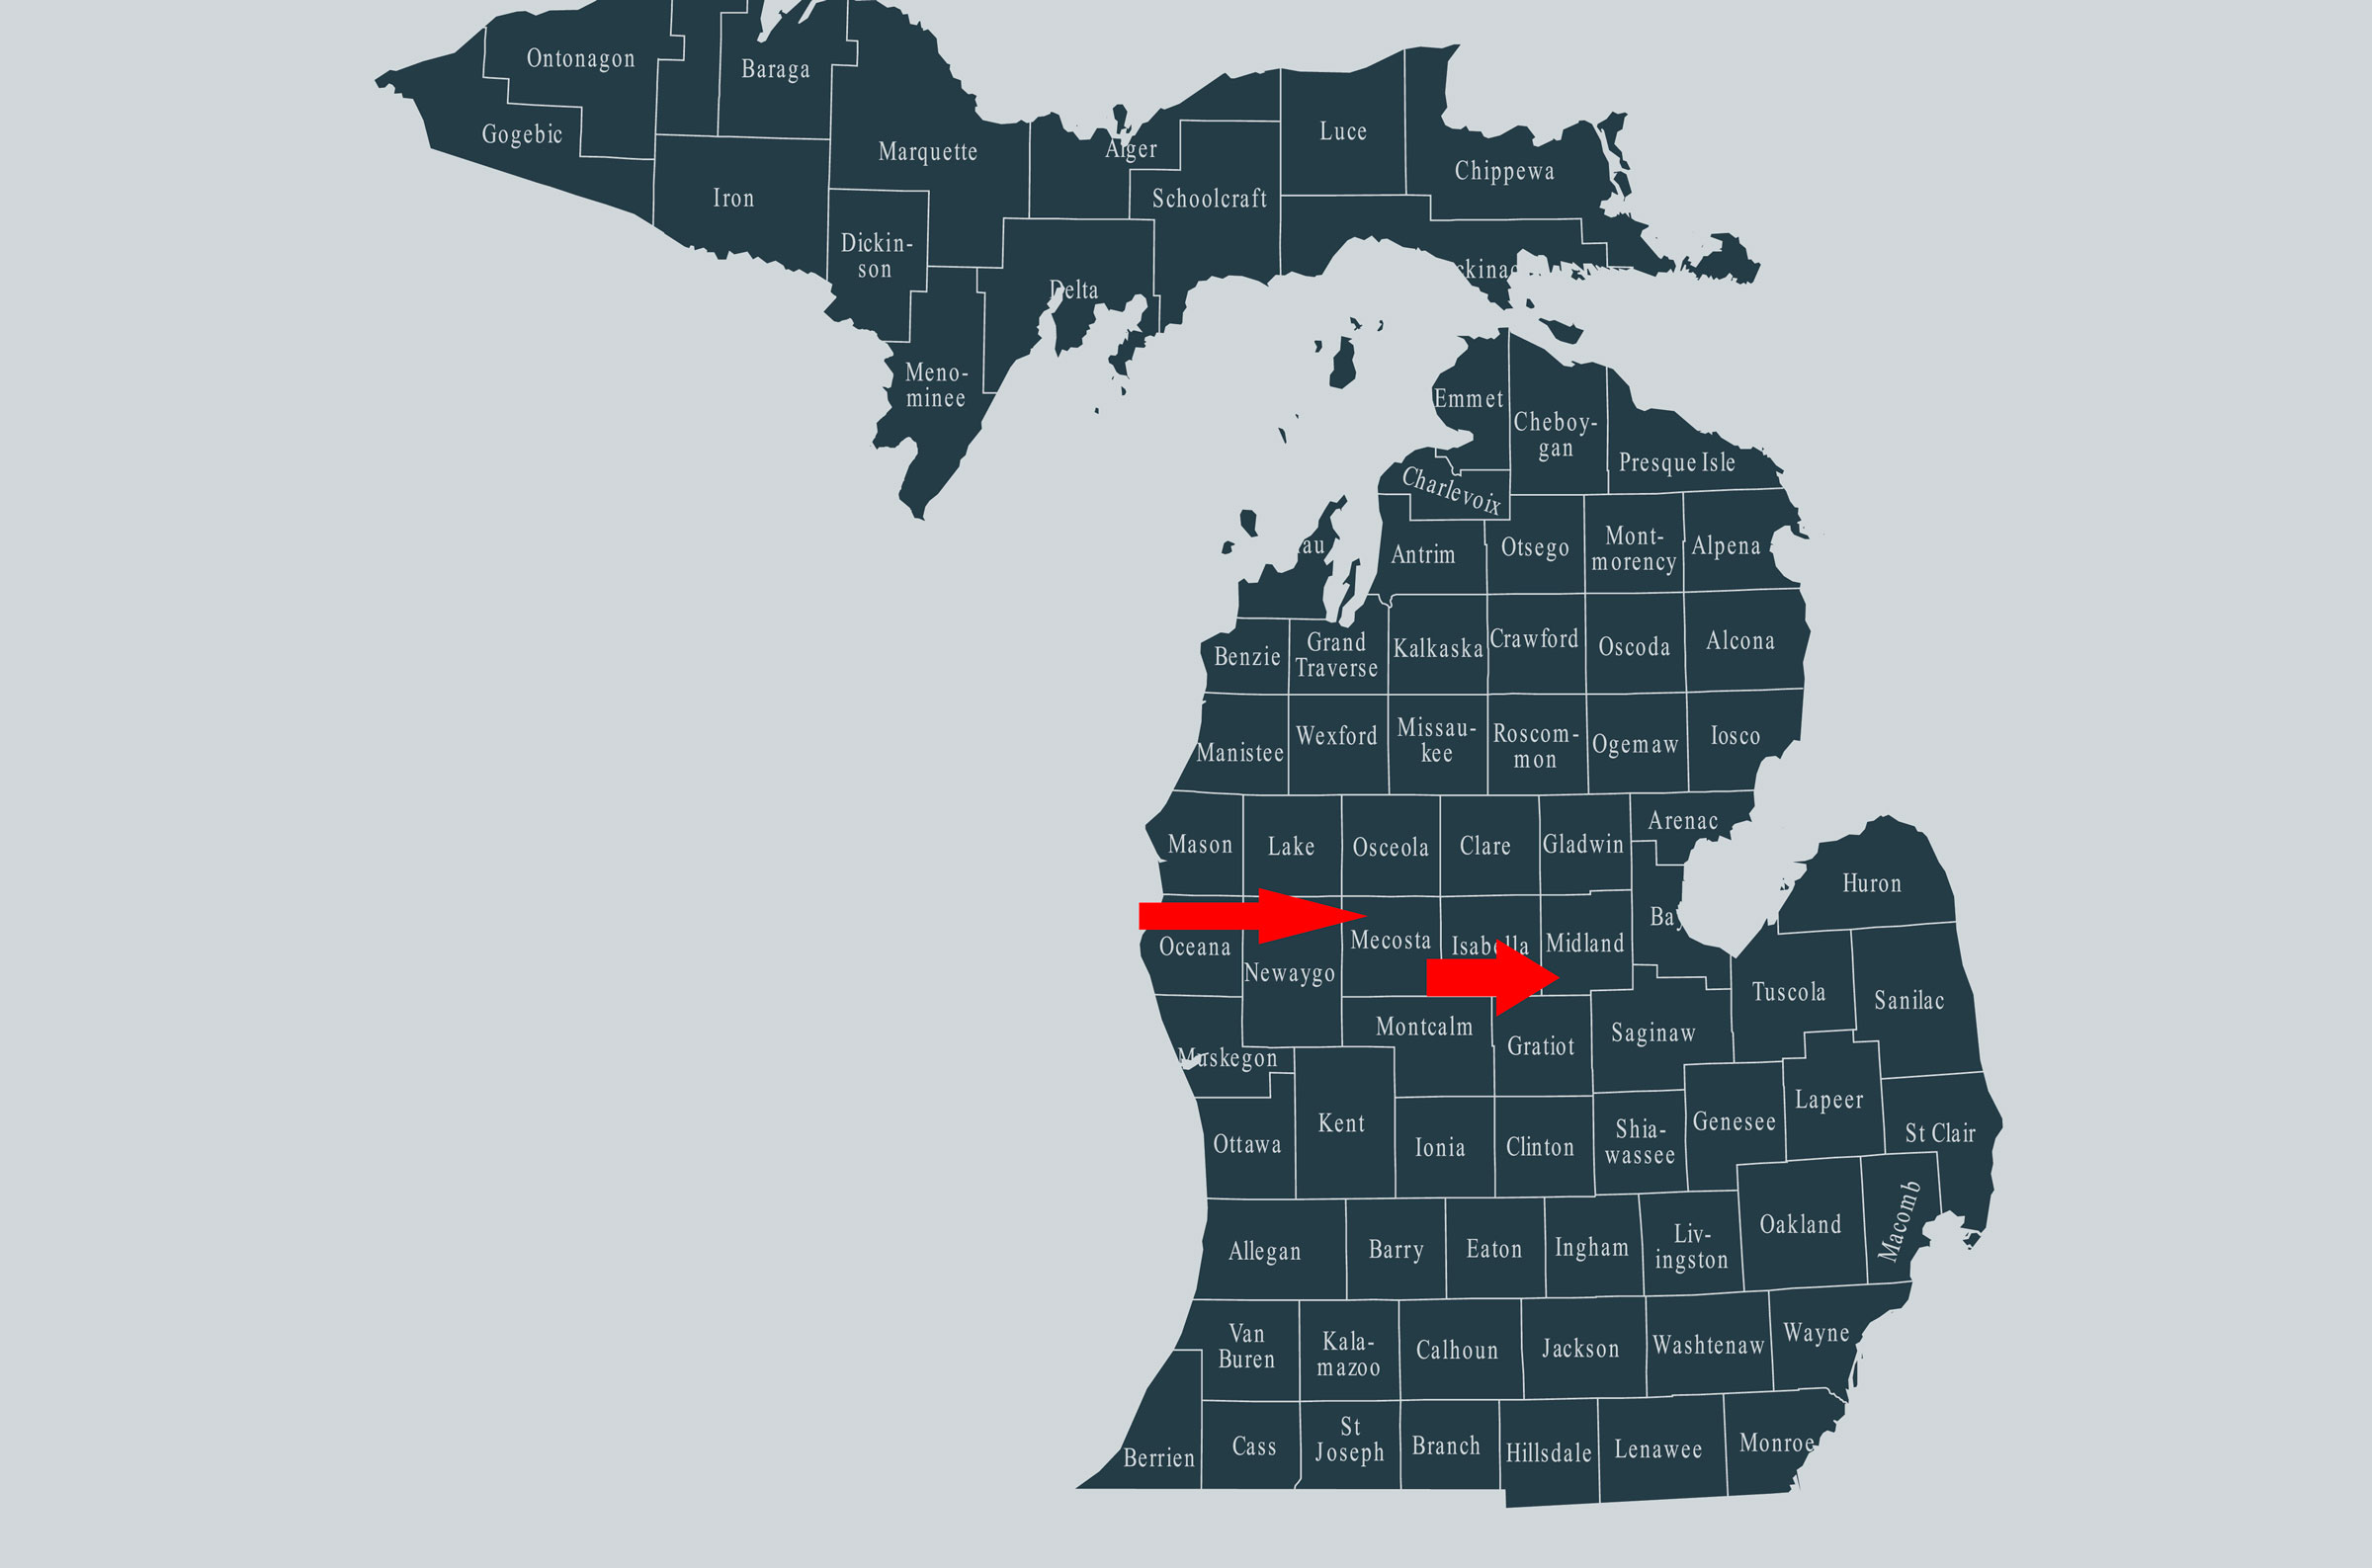 Michigan Mecosta and Midland Counties map